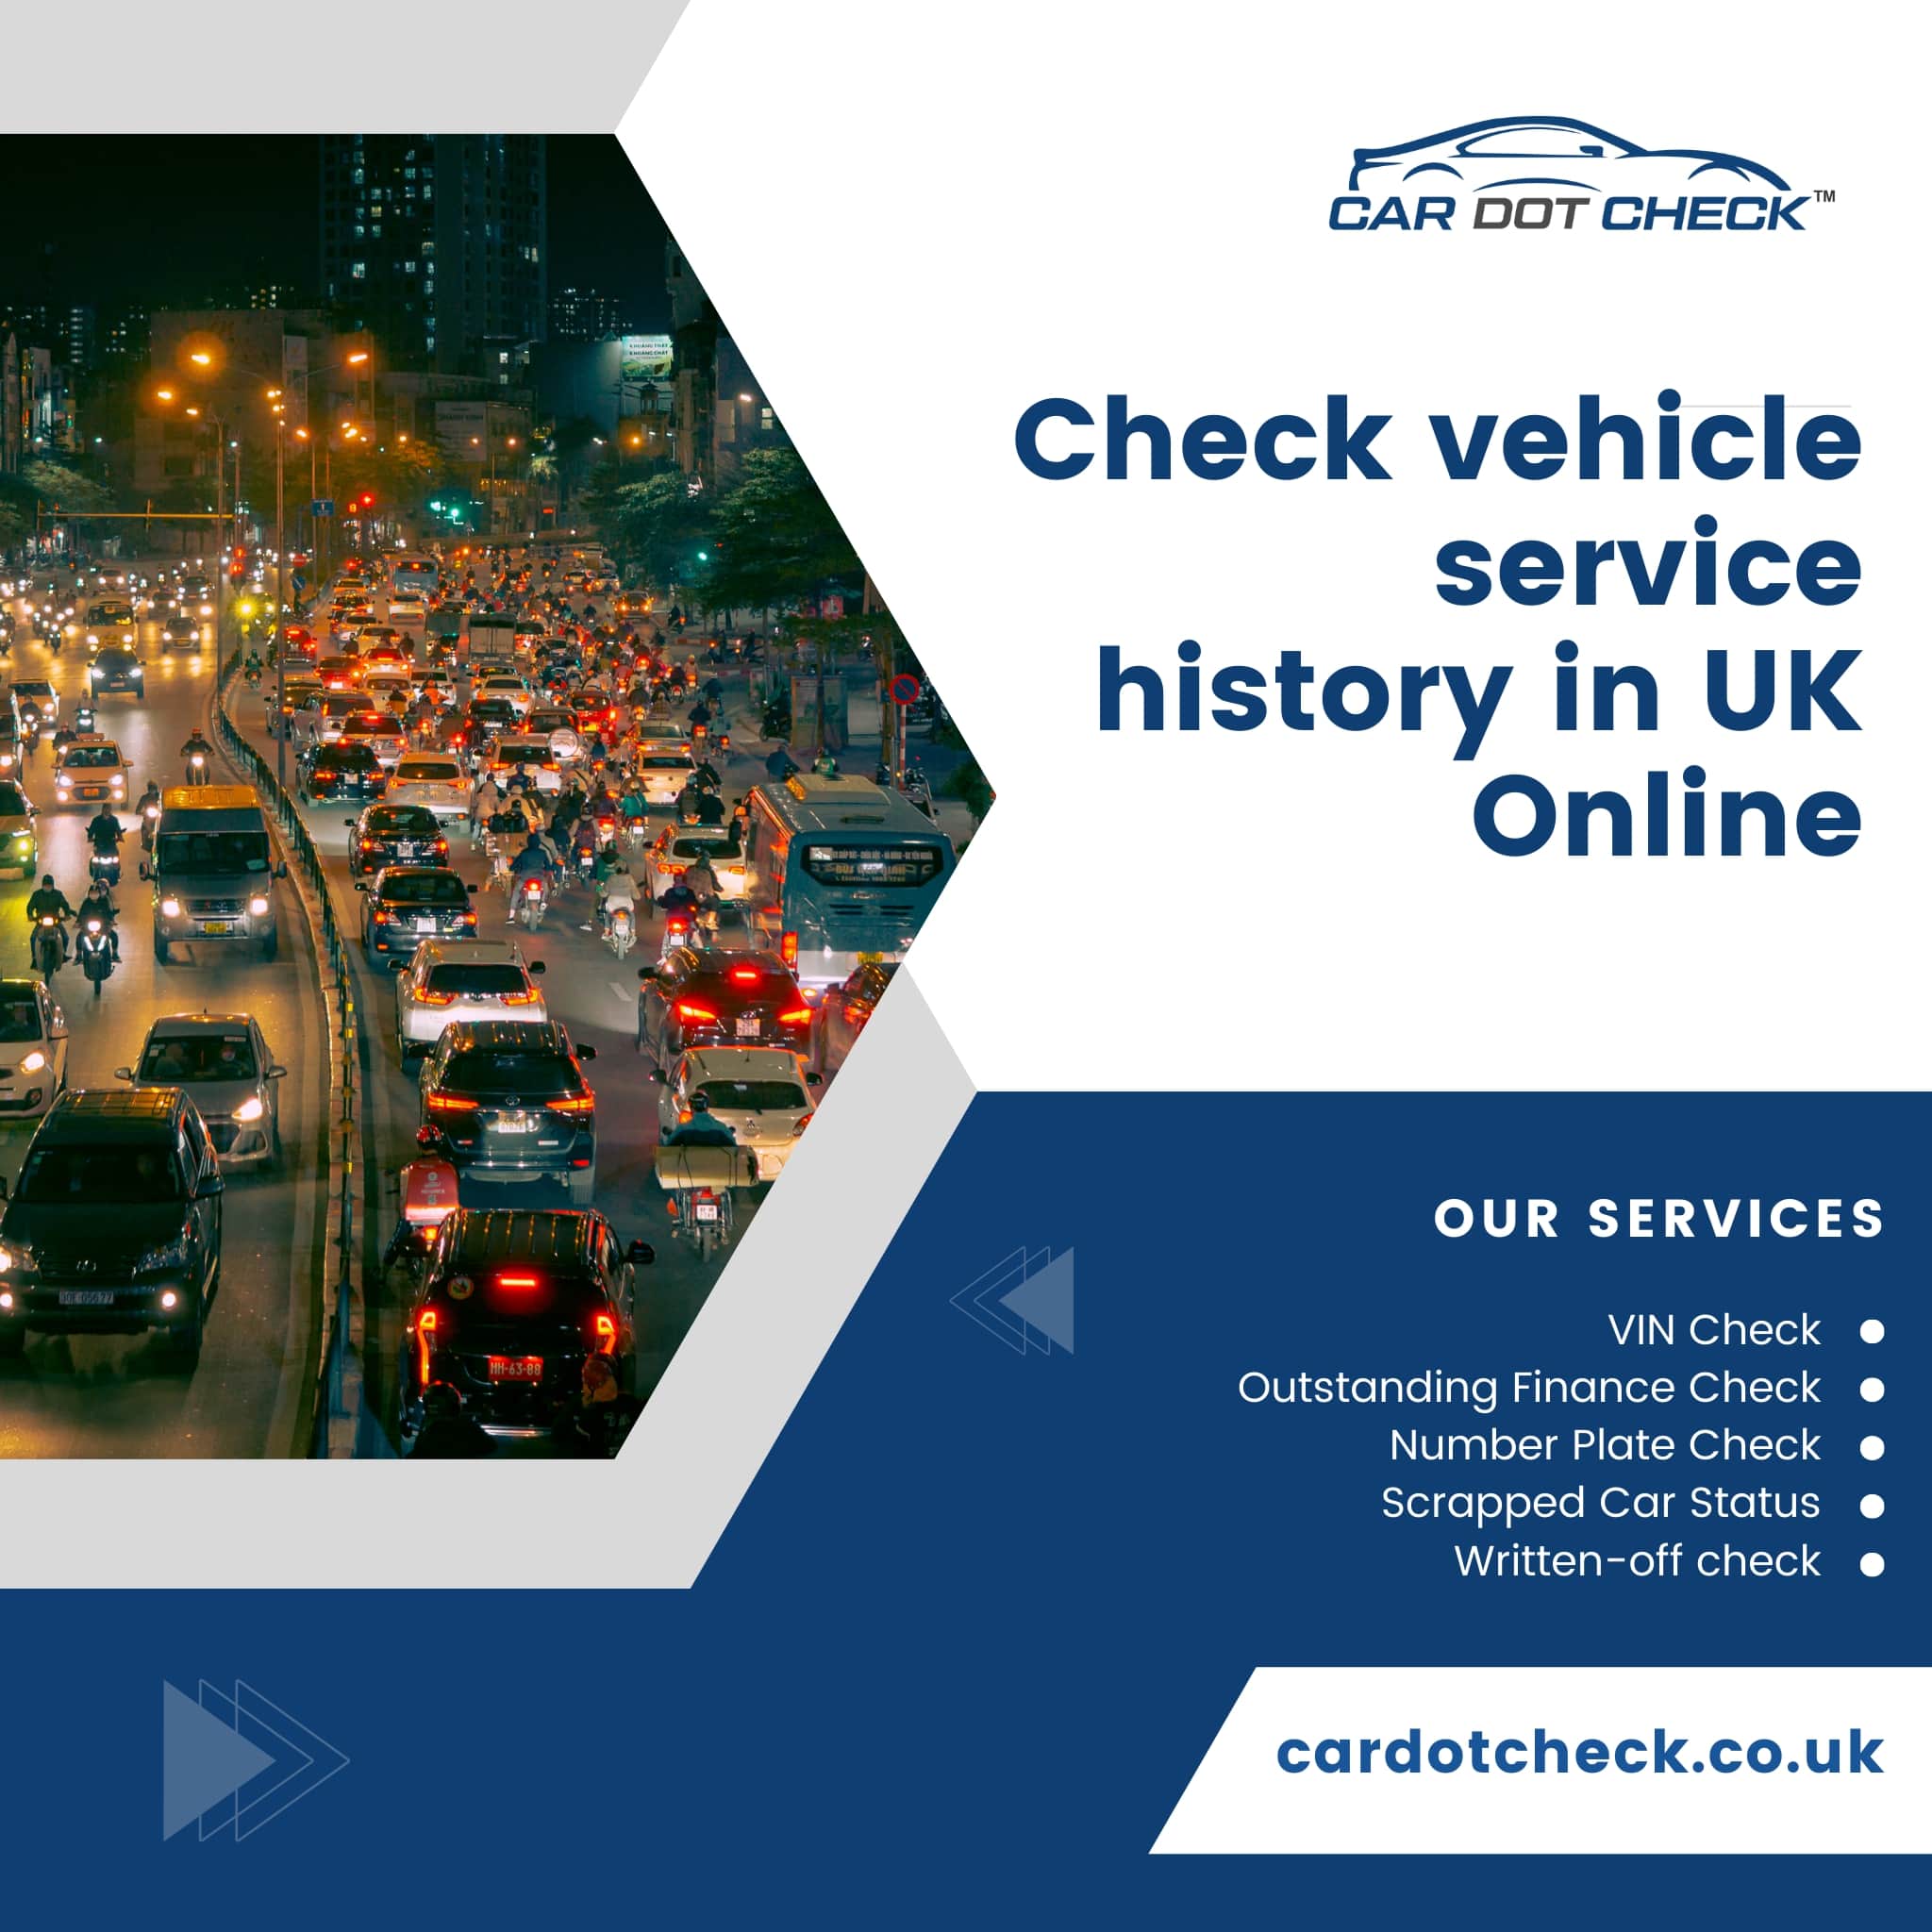 —
CAR DOT CHECK"

Check vehicle
service

history in UK
Online

   

OUR SERVICES

VIN Check

Outstanding Finance Check
Number Plate Check
Scrapped Car Status
Written-off check

 

cardotcheck.co.uk